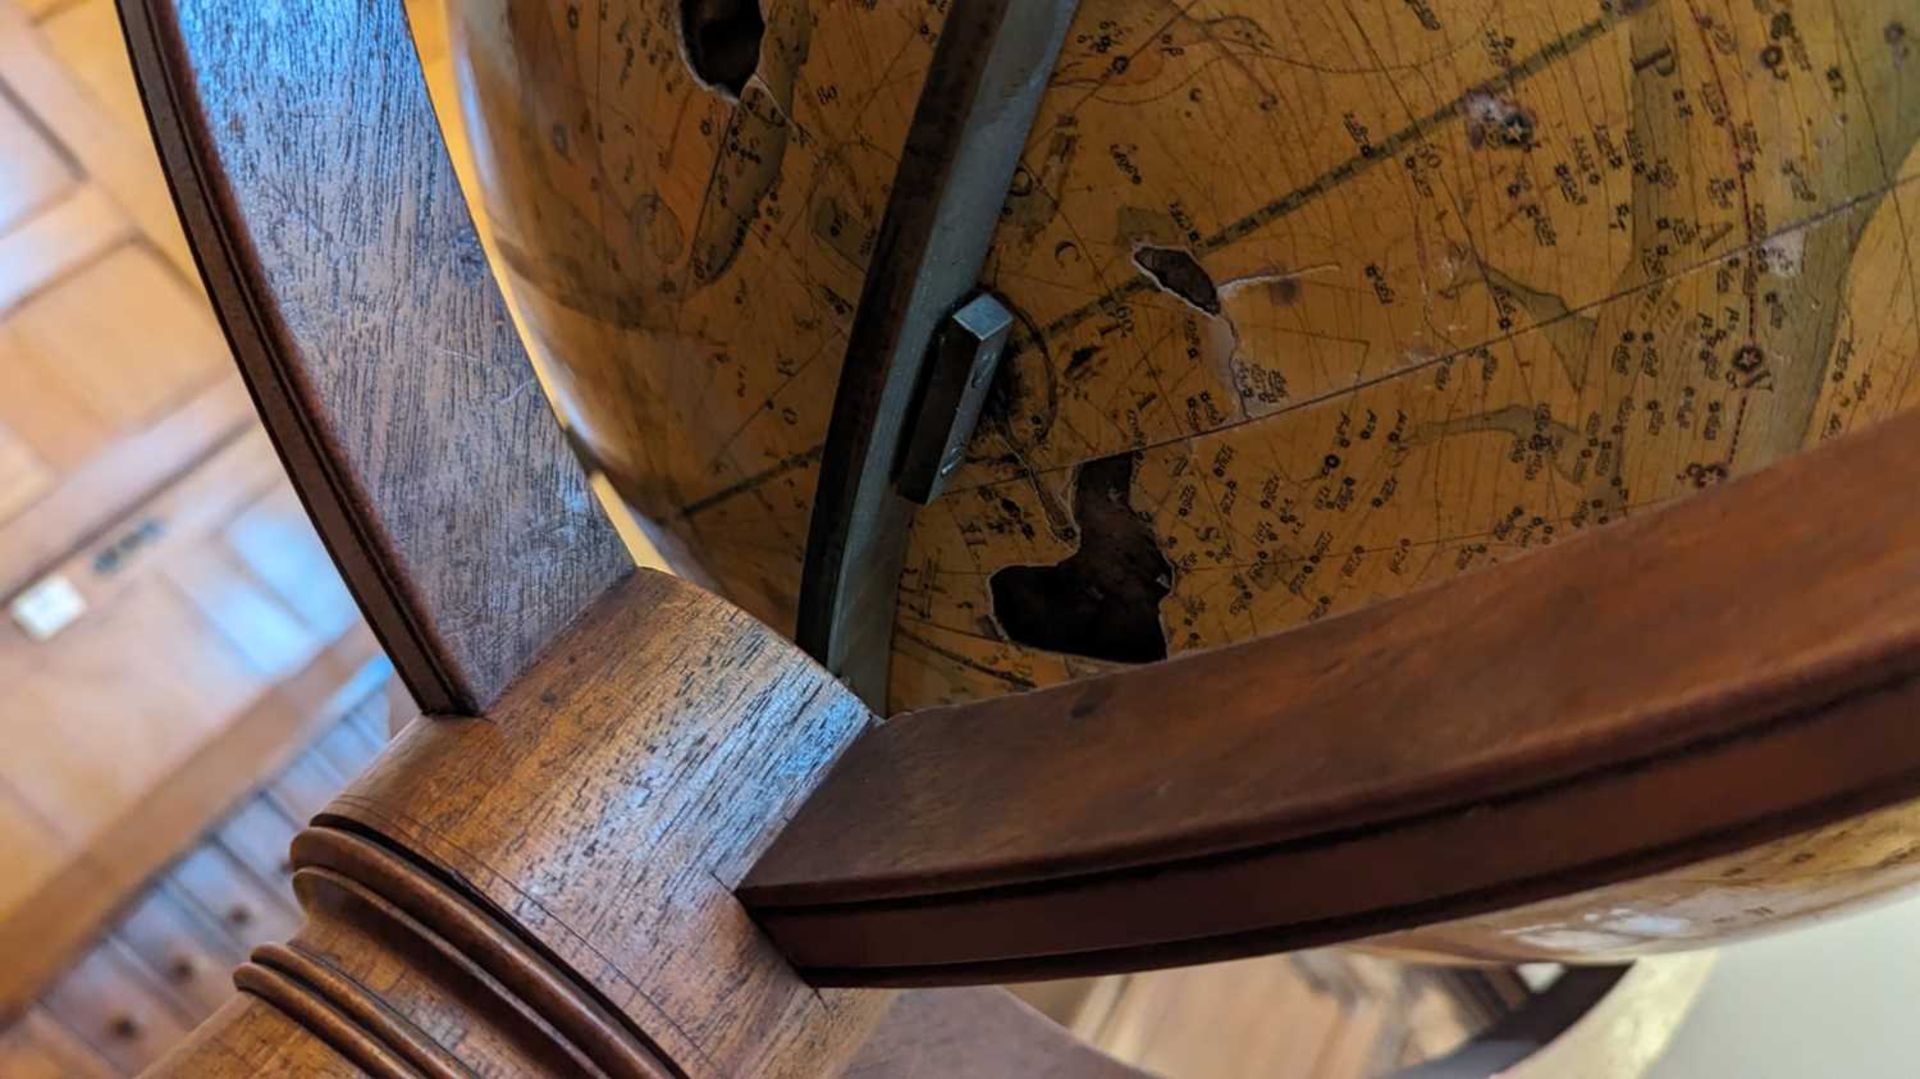 A large celestial library globe by J & W Cary, - Image 23 of 84